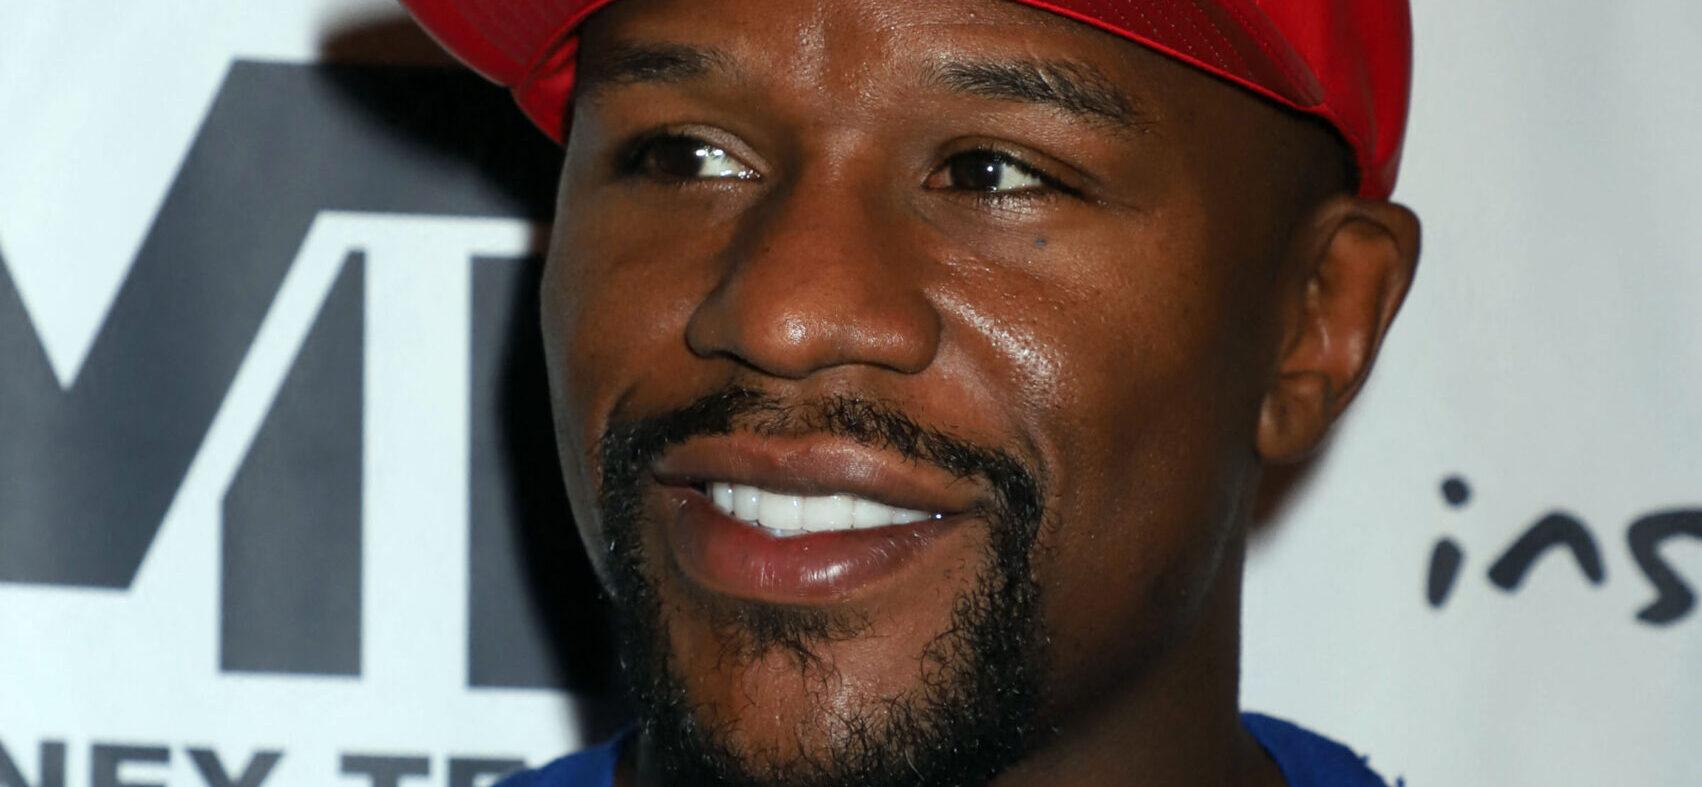 Floyd Mayweather Sued Over Car Accident With Injuries